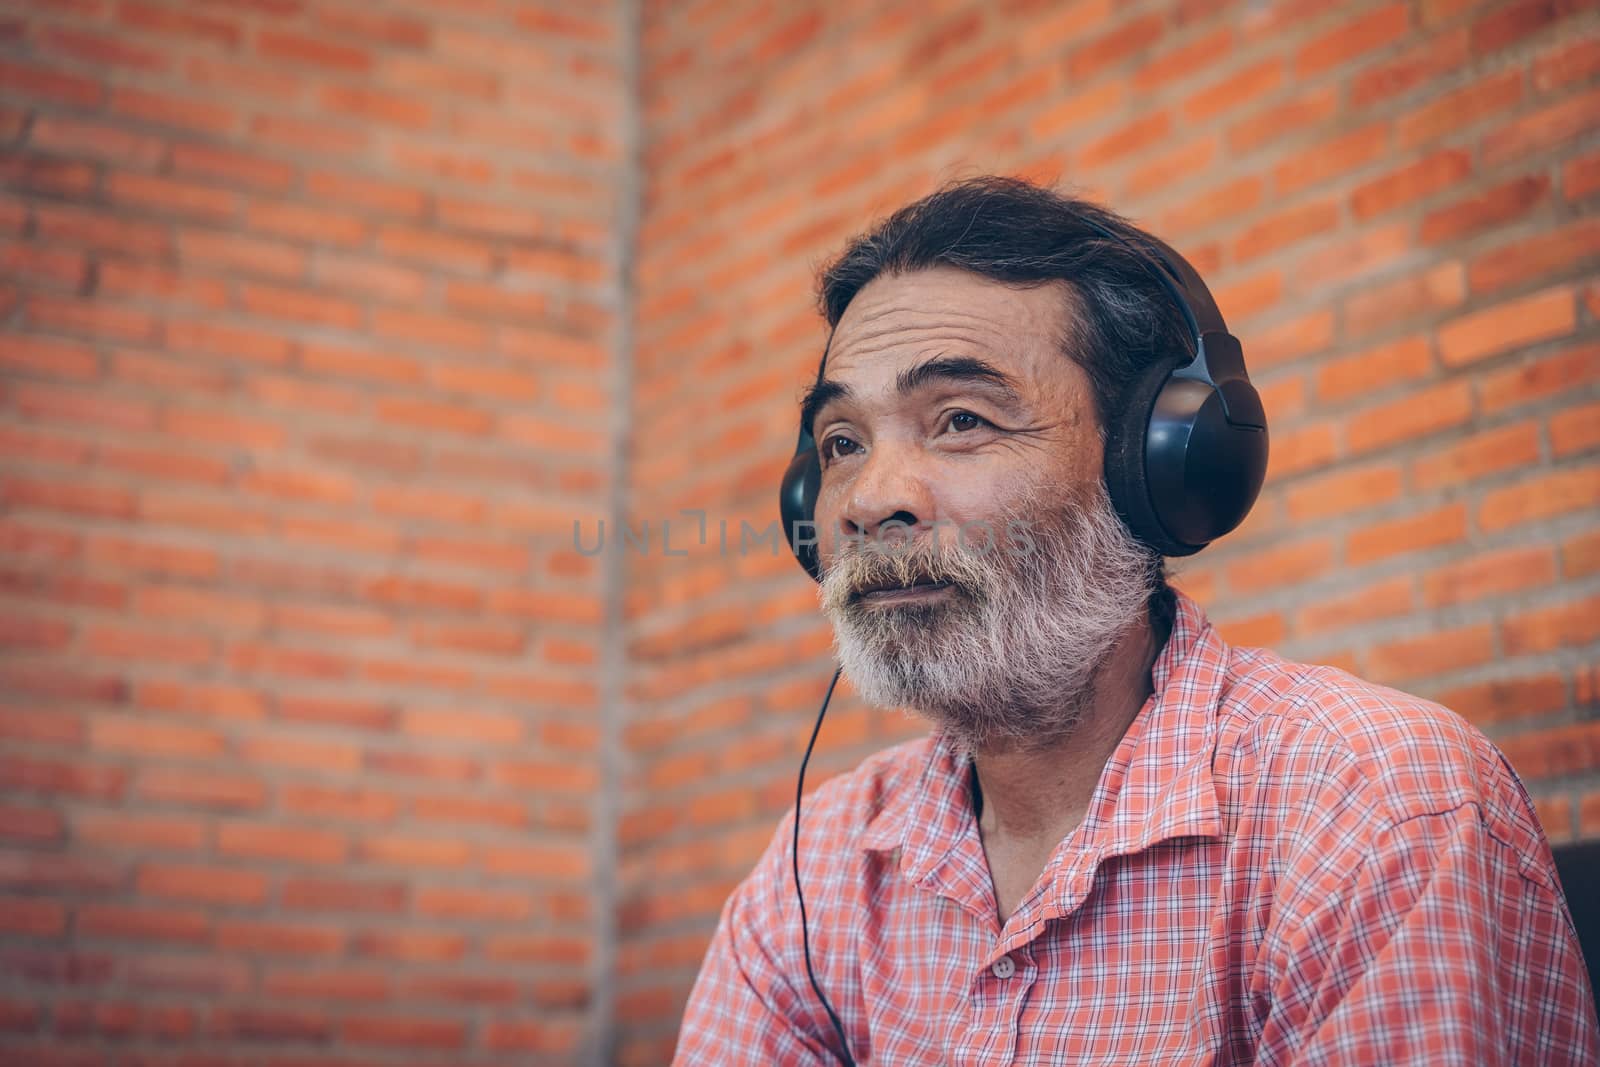 The old man listens to the music from the headphones. by Visoot